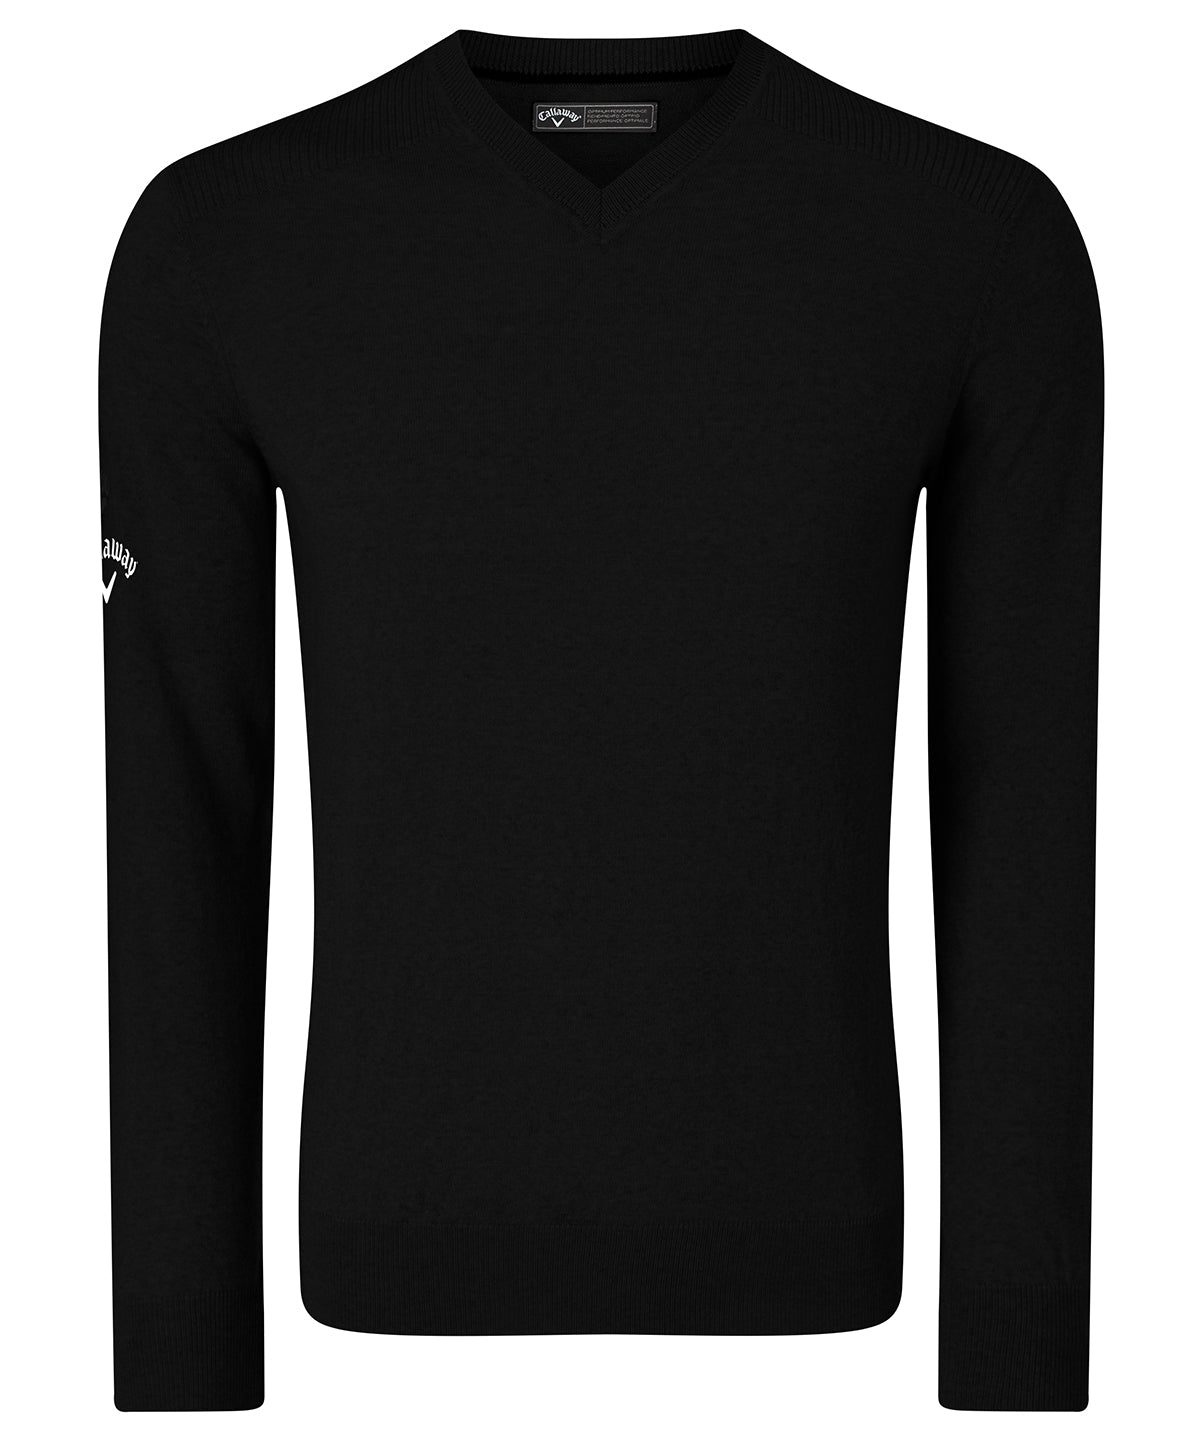 Personalised Knitted Jumpers - Black Callaway Ribbed v-neck Merino sweater